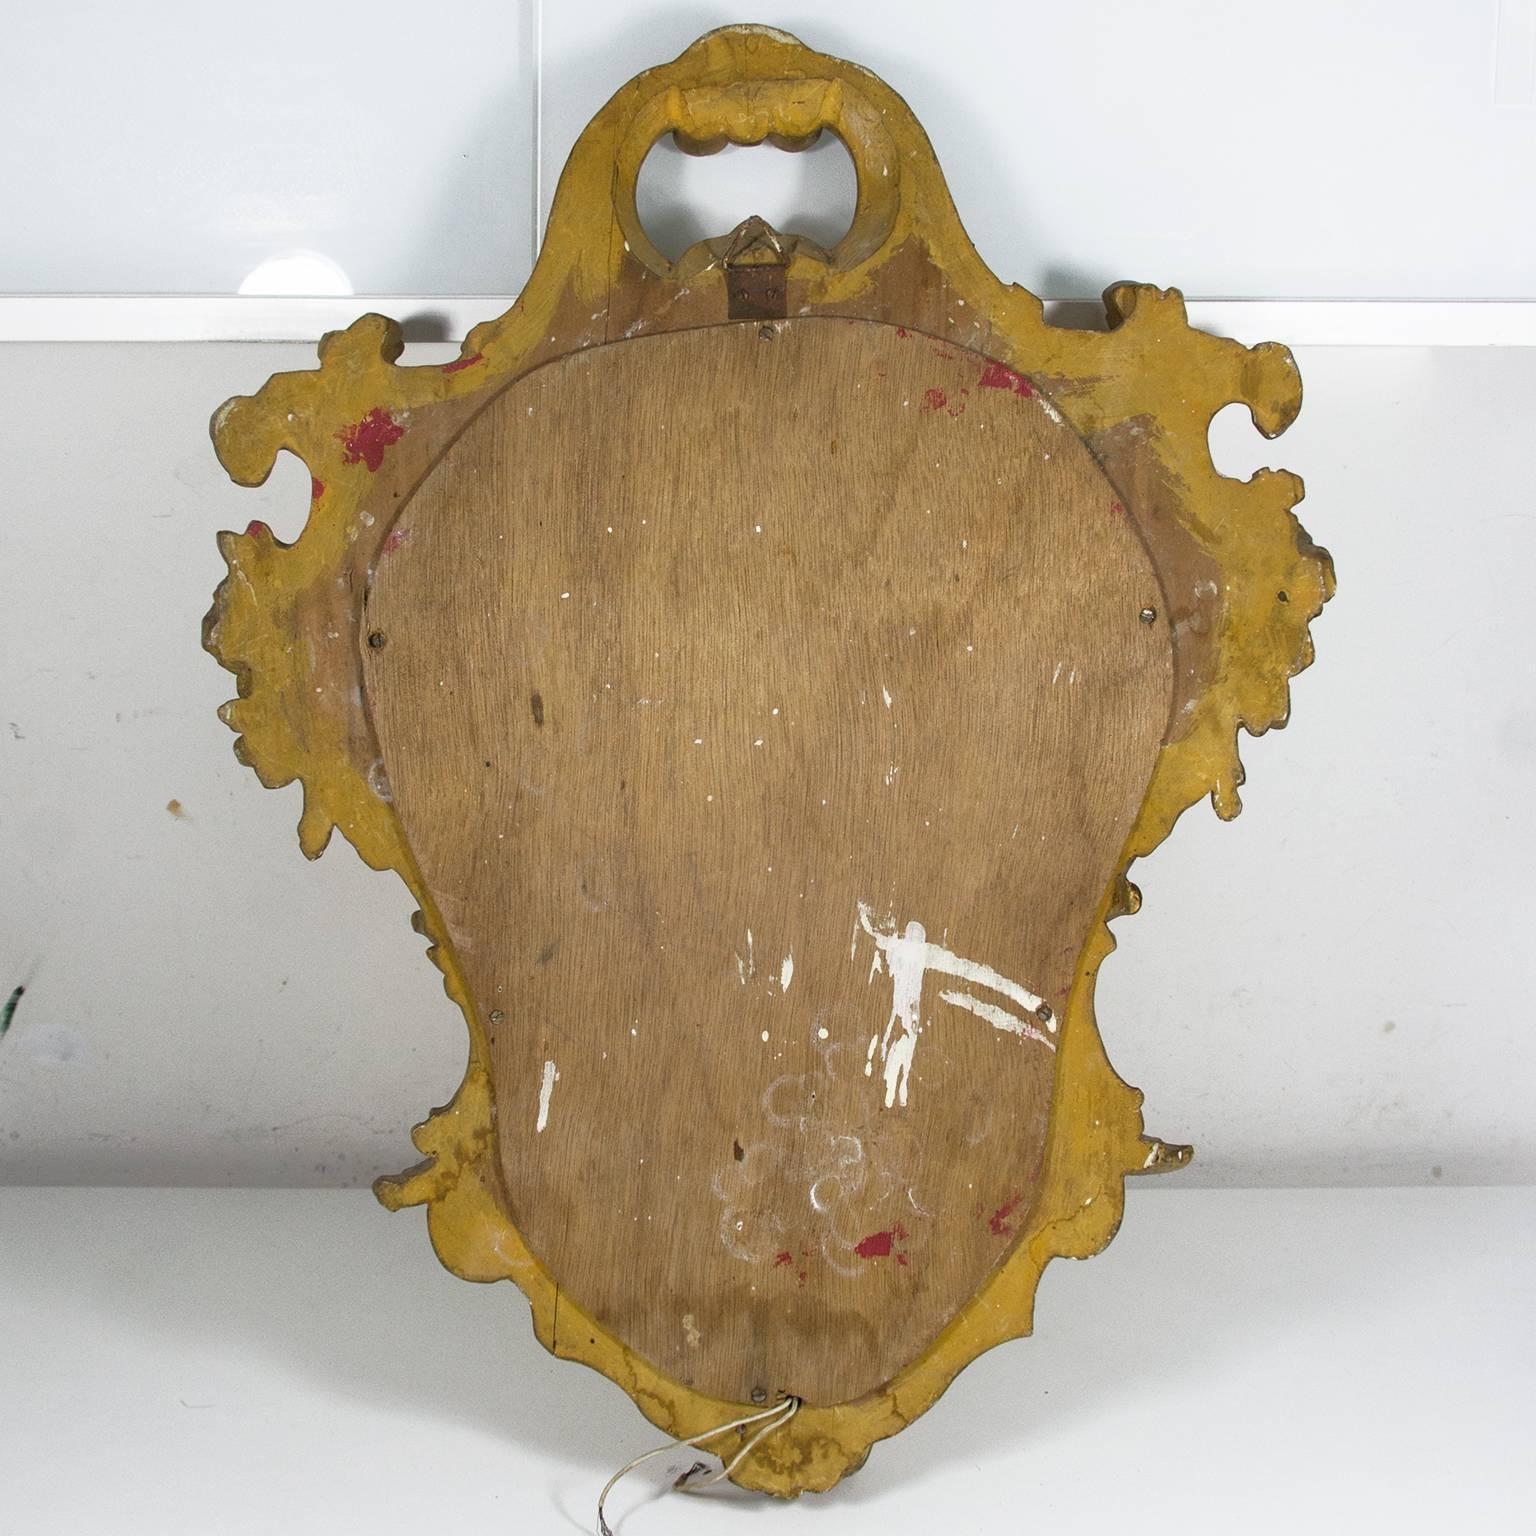 Antique Italian carved giltwood ornate wall mirror with lamp scones. Very good original condition (please see photos). Measurements: Height: 52 cm / 20.5 inch, width (the widest part): 40 cm/15.7 inch.